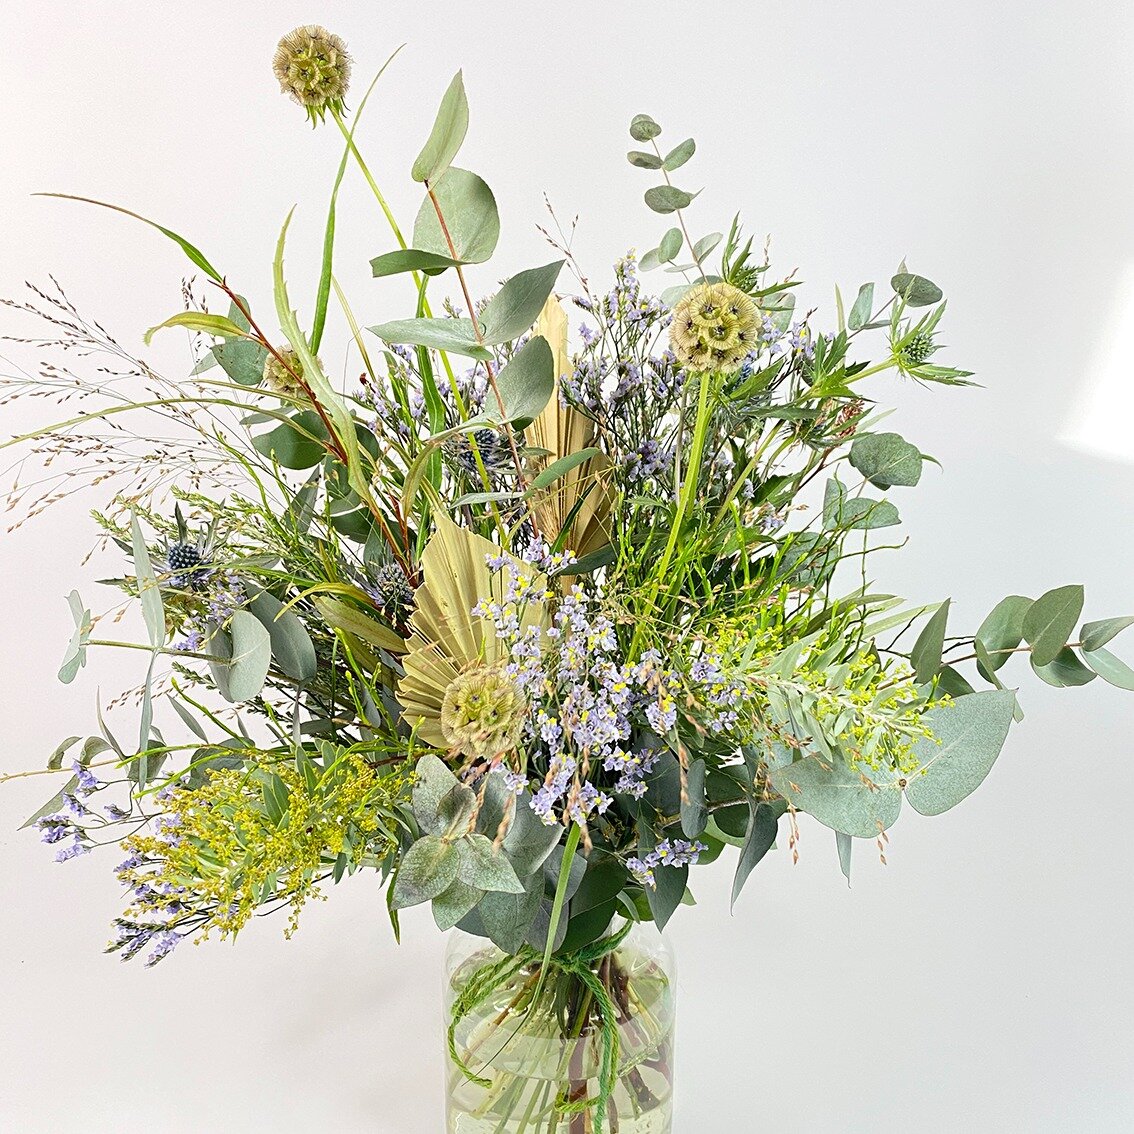 Rustique Mother's Day

A gloriously wild alternative to the norm for Mother&rsquo;s Day

A wildly wonderful bundle of textural foliages, accent blooms and long lasting/everlasting trimmings.

Rustique is the ideal bouquet for the wild-child amongst u